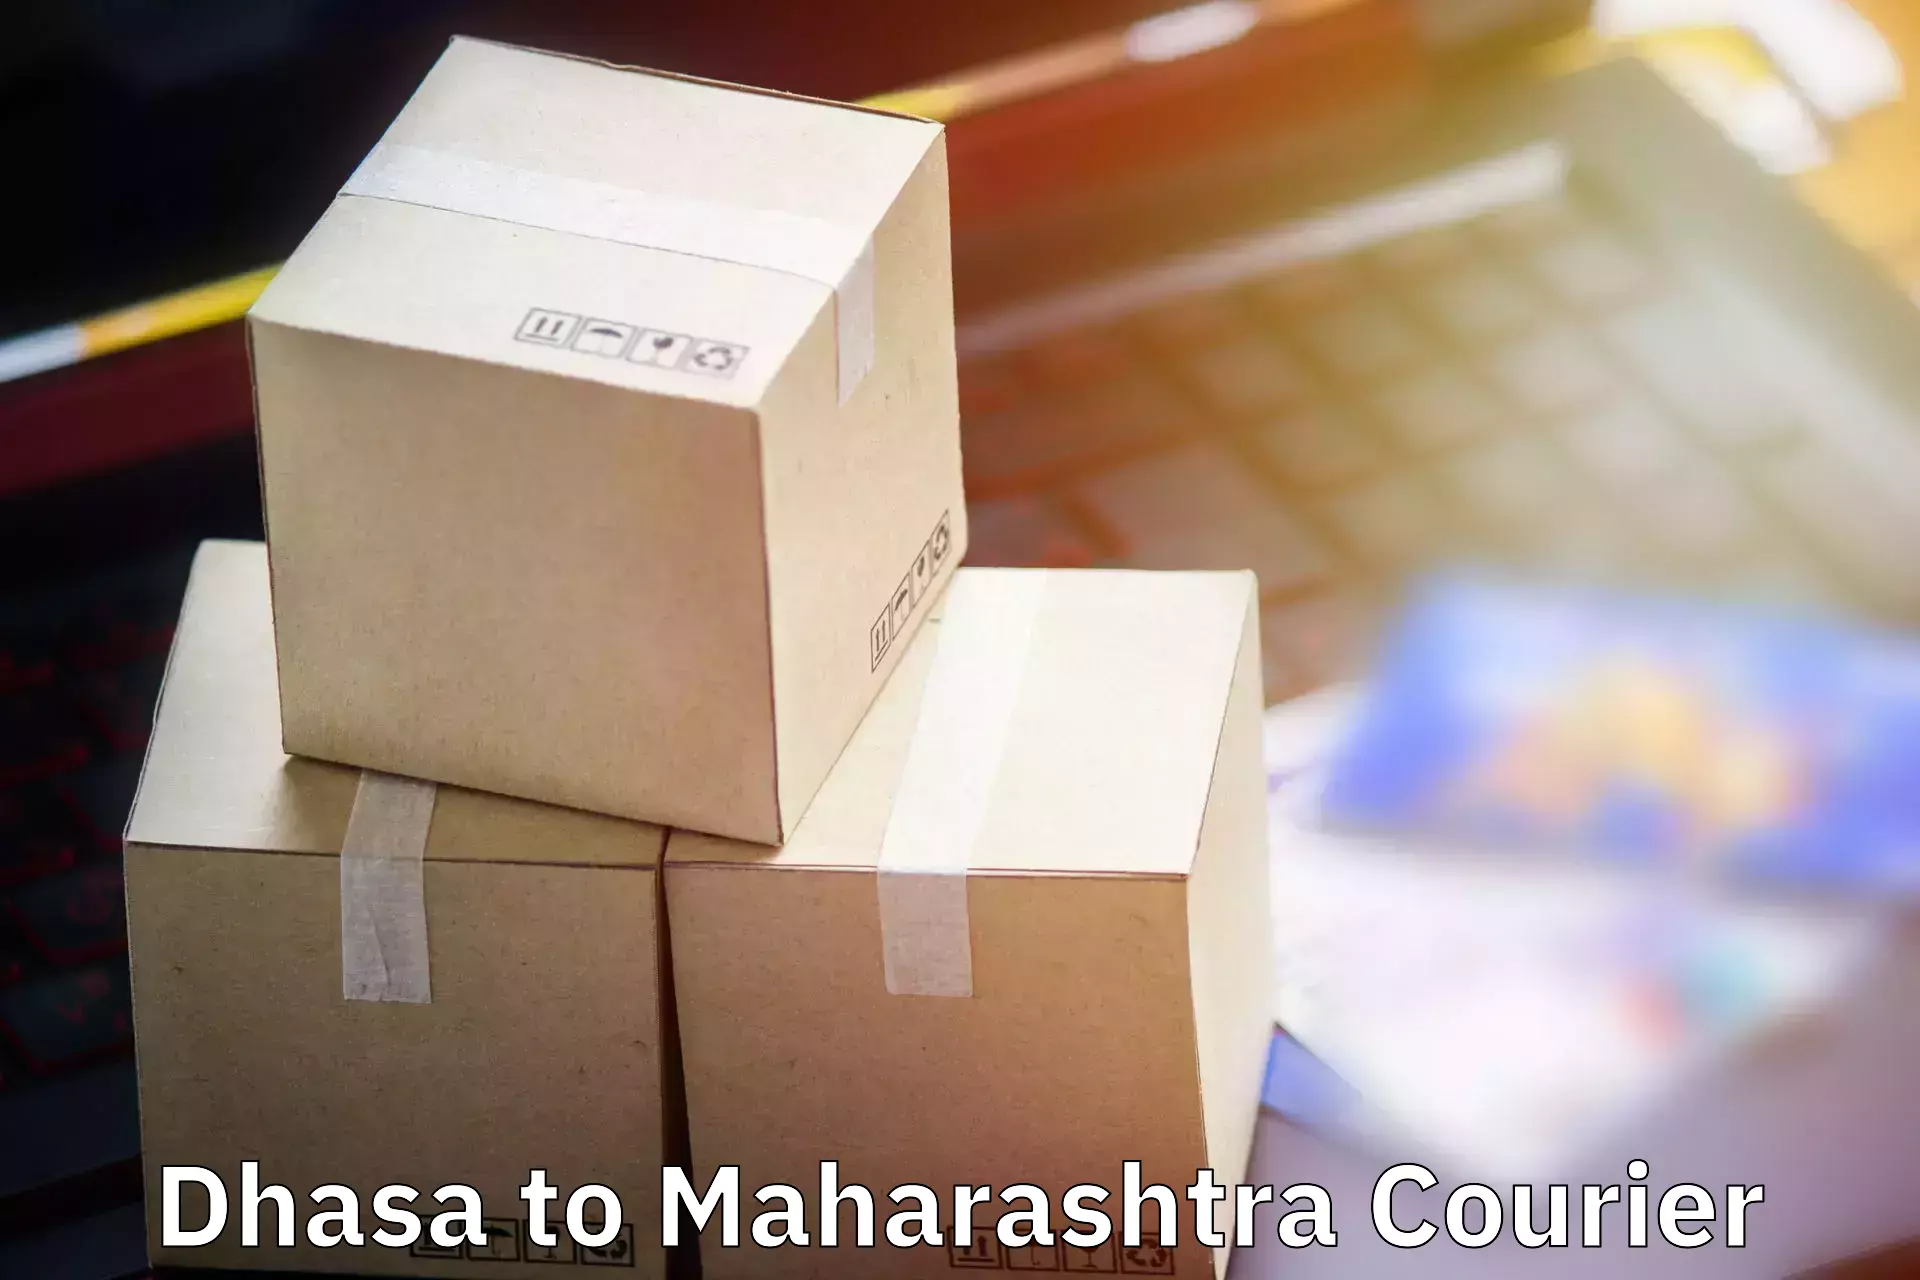 Personal effects shipping Dhasa to Khed